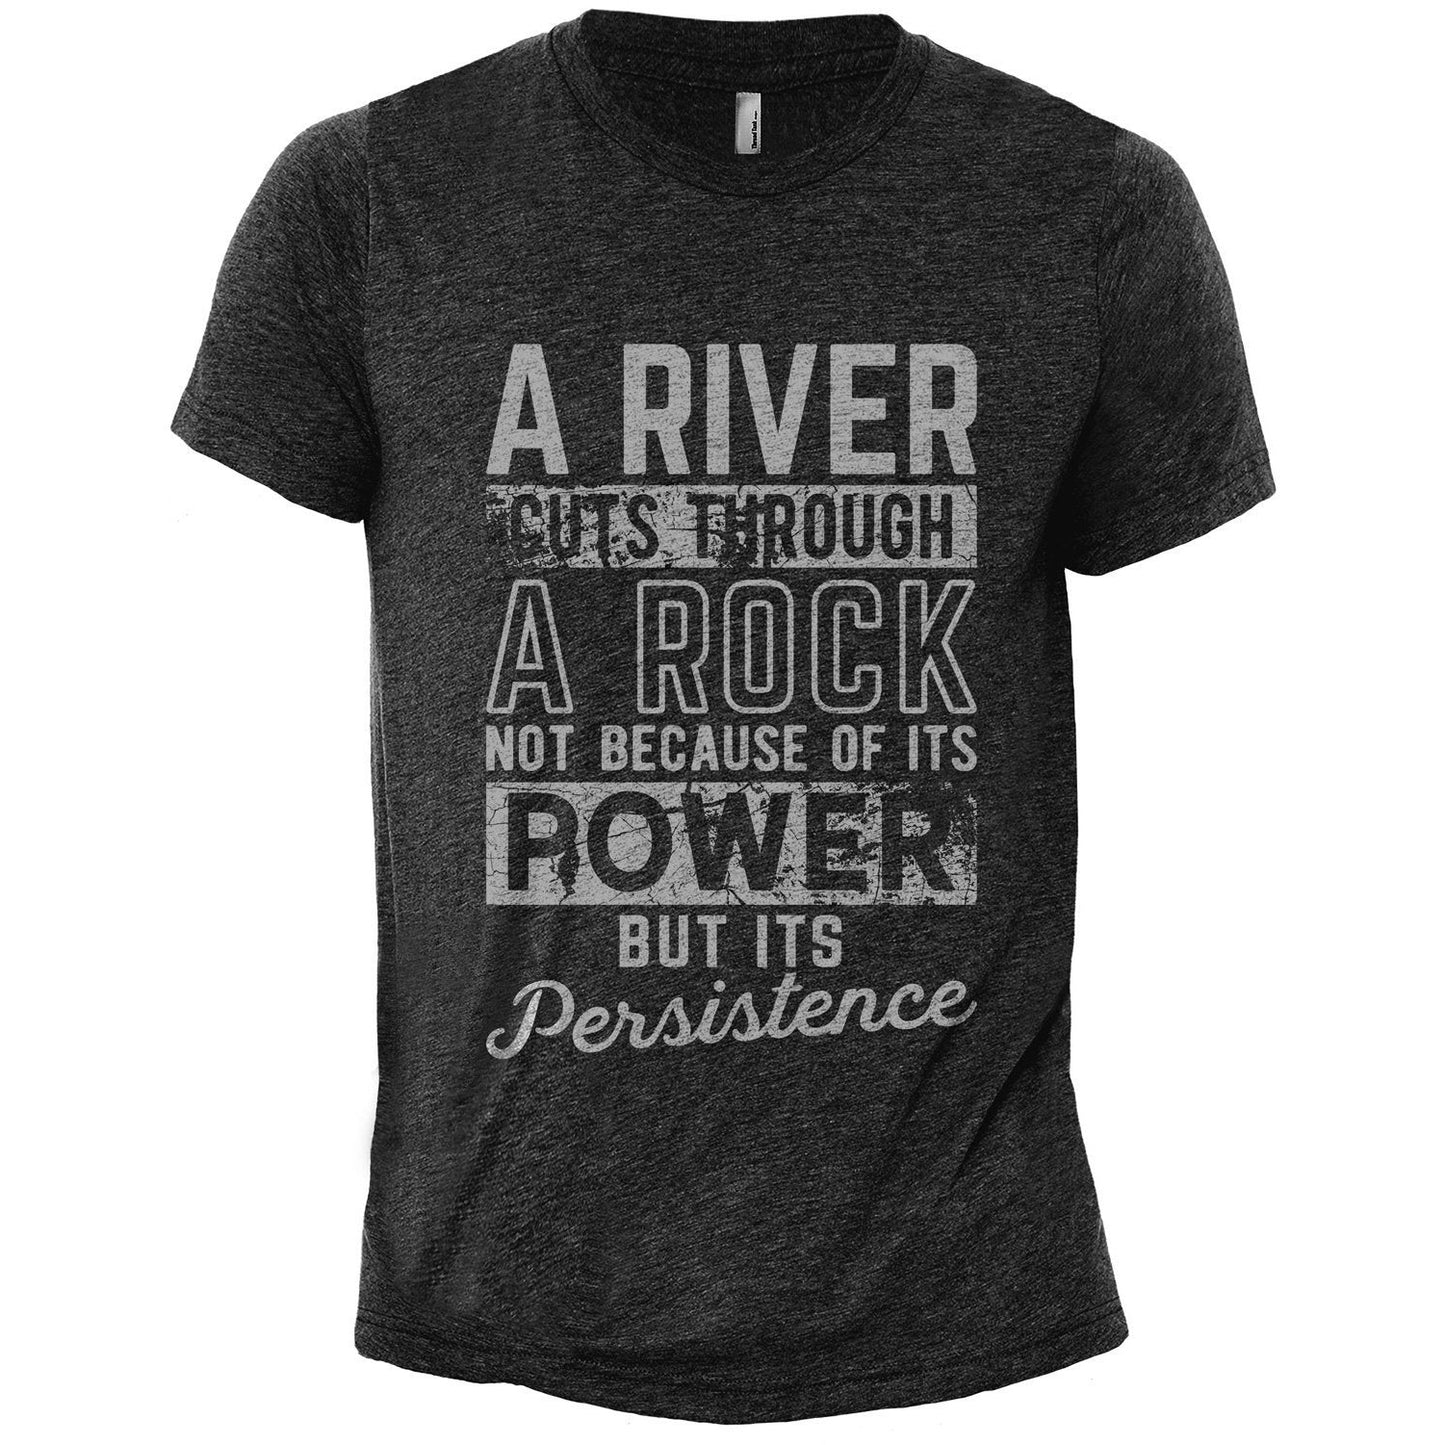 A River Cuts Through A Rock Not Because Of It's Power But It's Persistence Charcoal Printed Graphic Men's Crew T-Shirt Tee